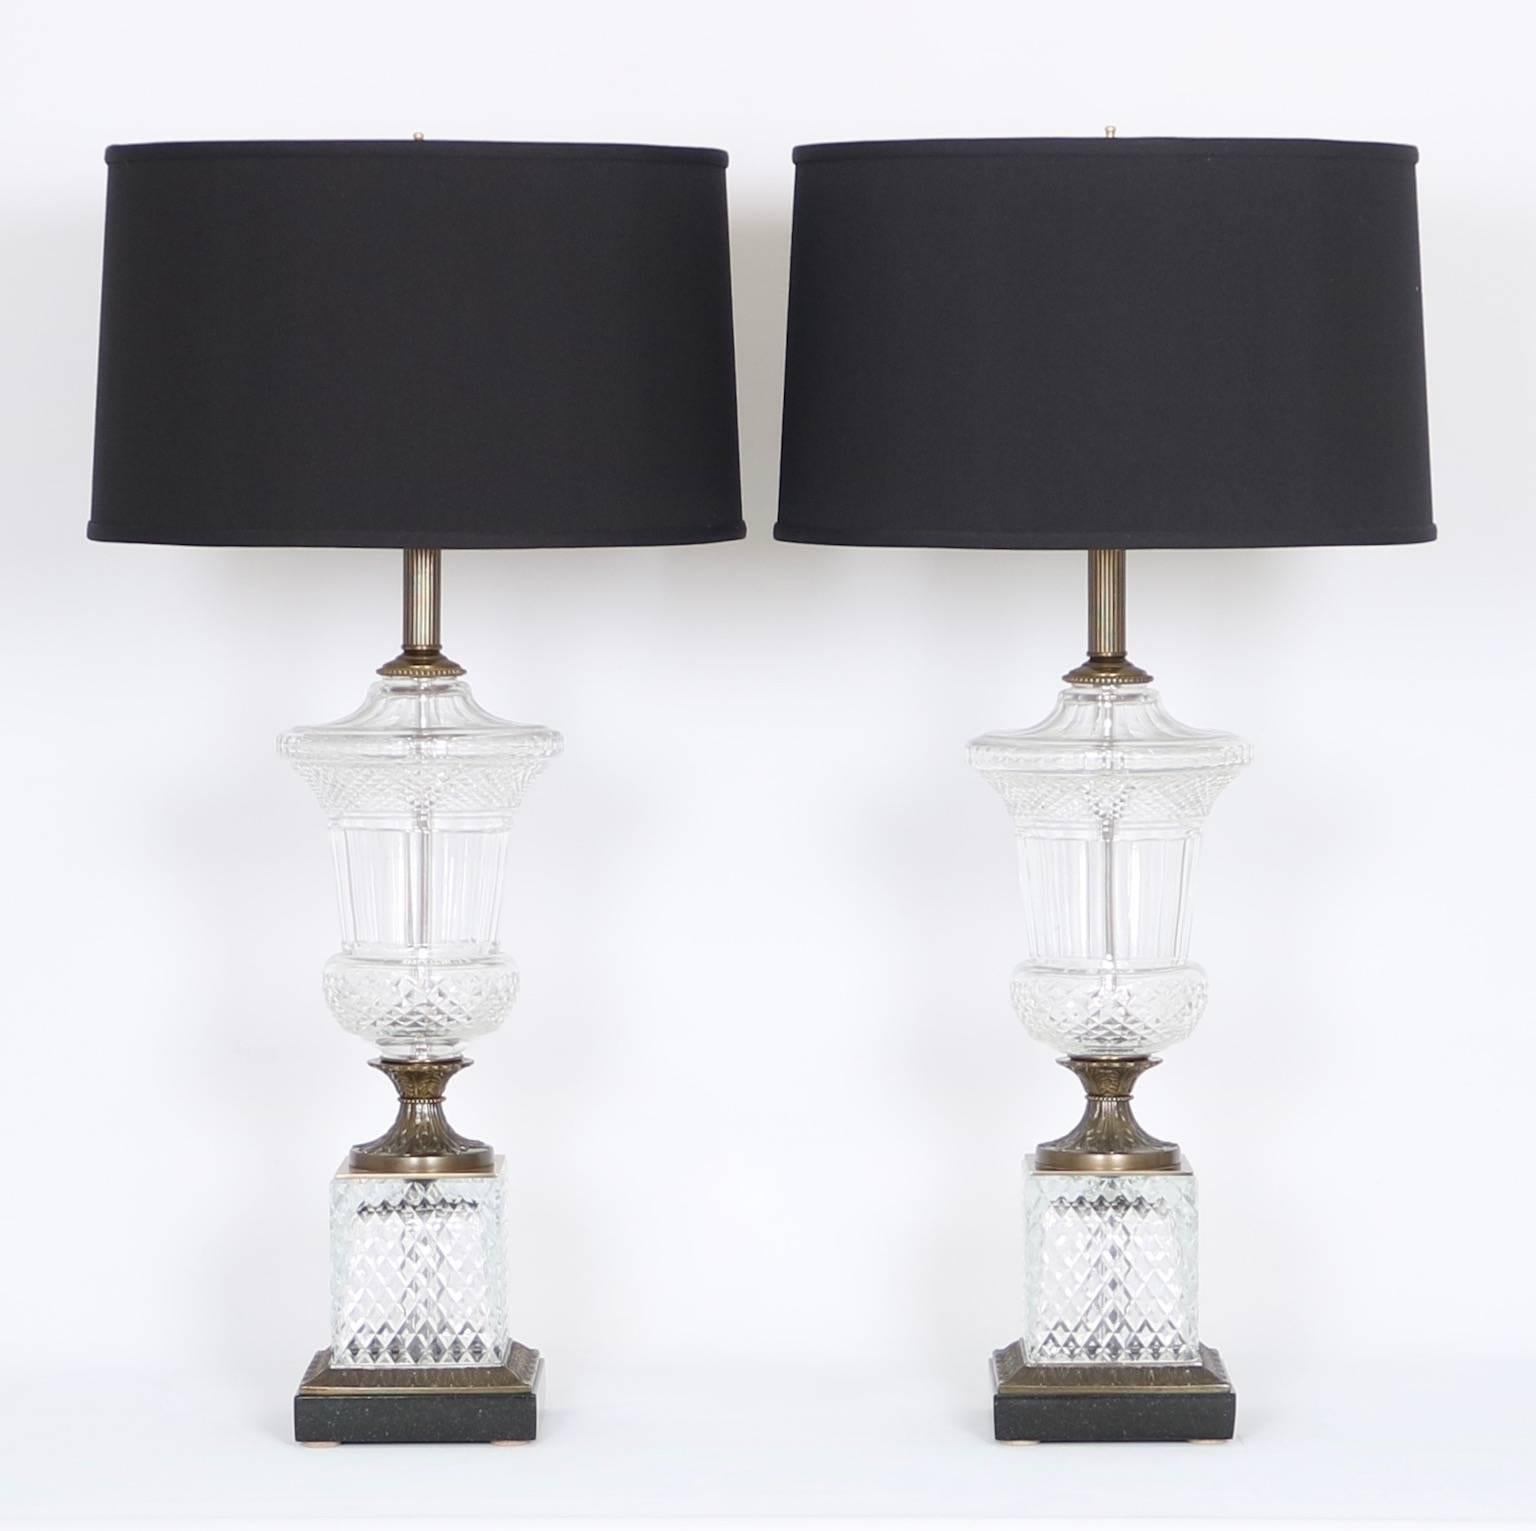 A pair of Hollywood Regency era table lamps, manufactured by Paul Hanson, circa 1950s-1960s, of urn form in faceted crystal, brass mounts with satin finish, on black stone bases. The noted height is to the finial. The height to the top of the socket